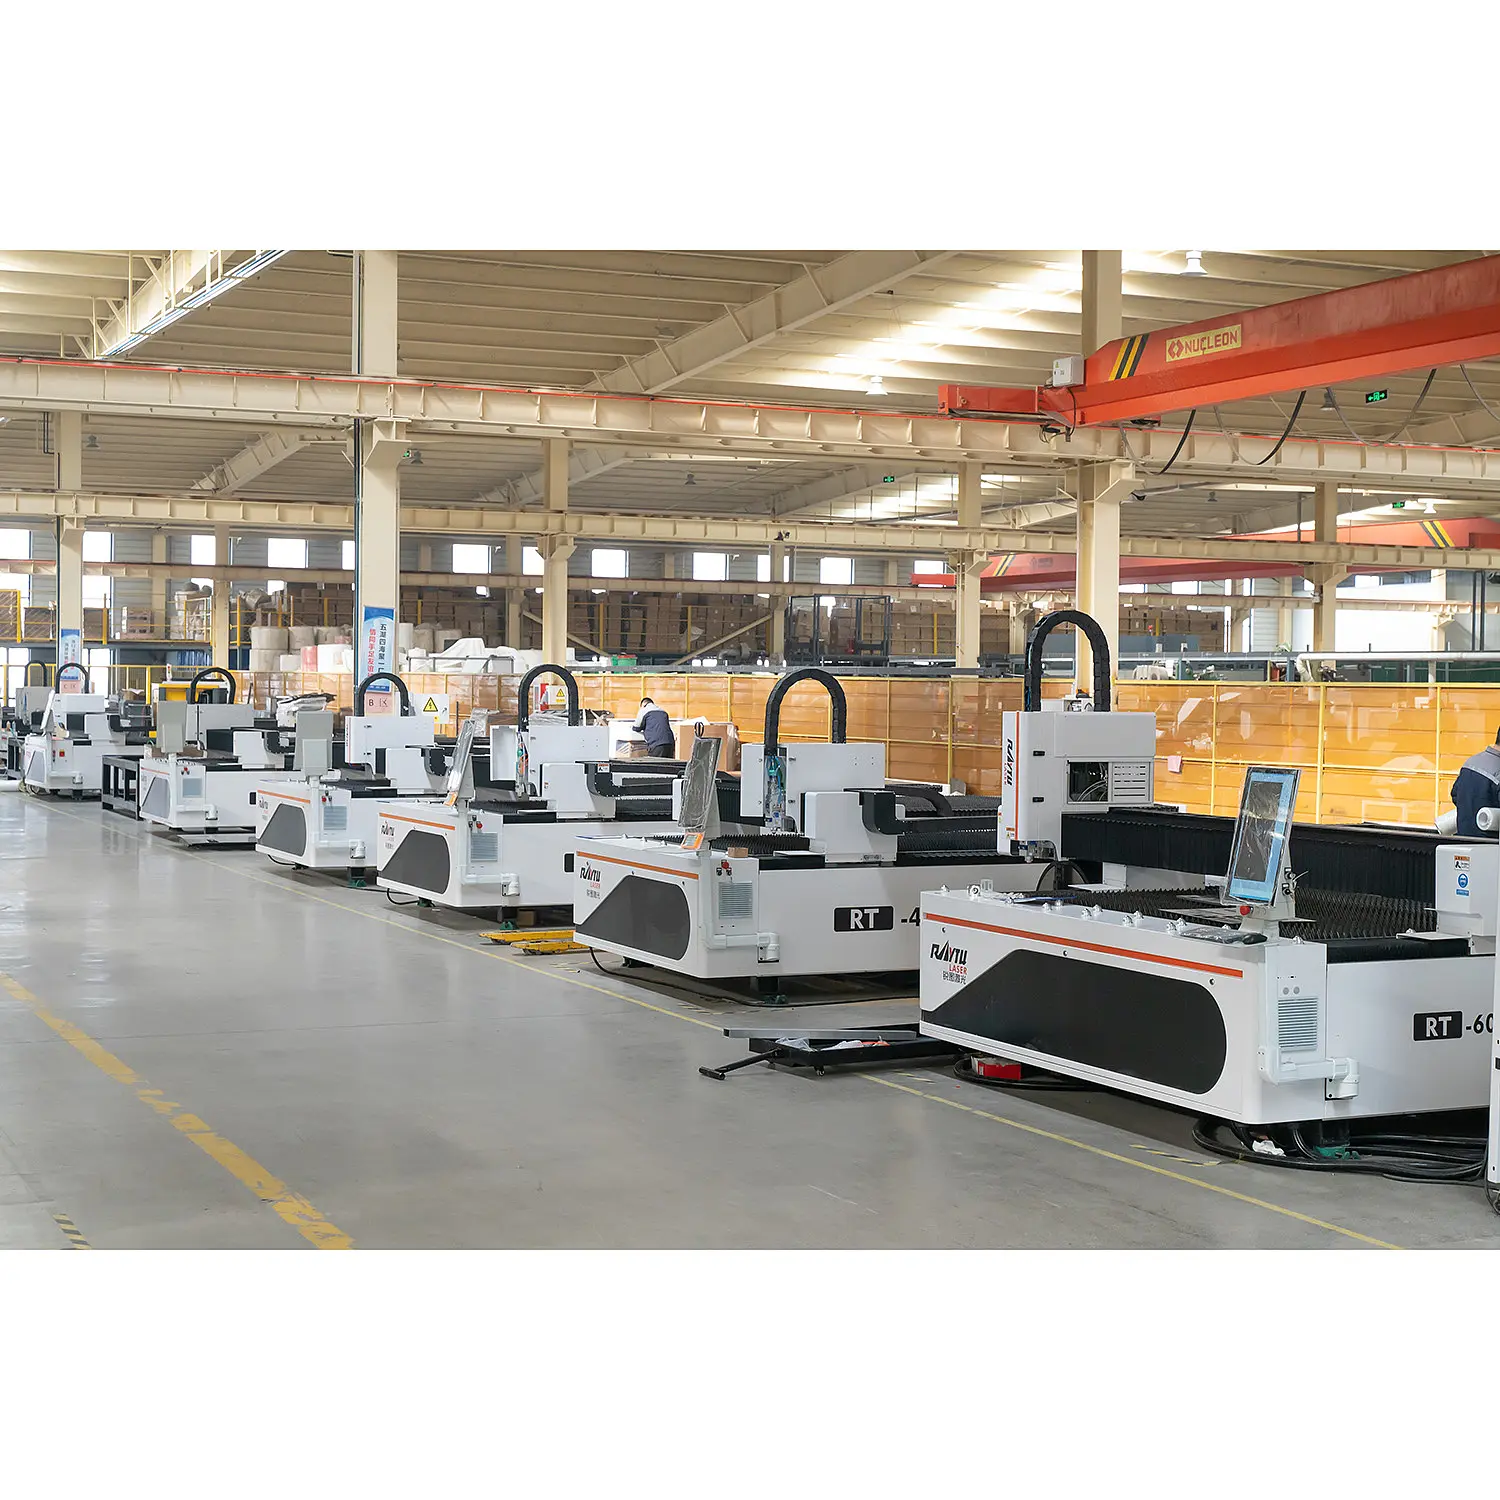 Raytu laser helps CNC machine tool companies run out of "acceleration"